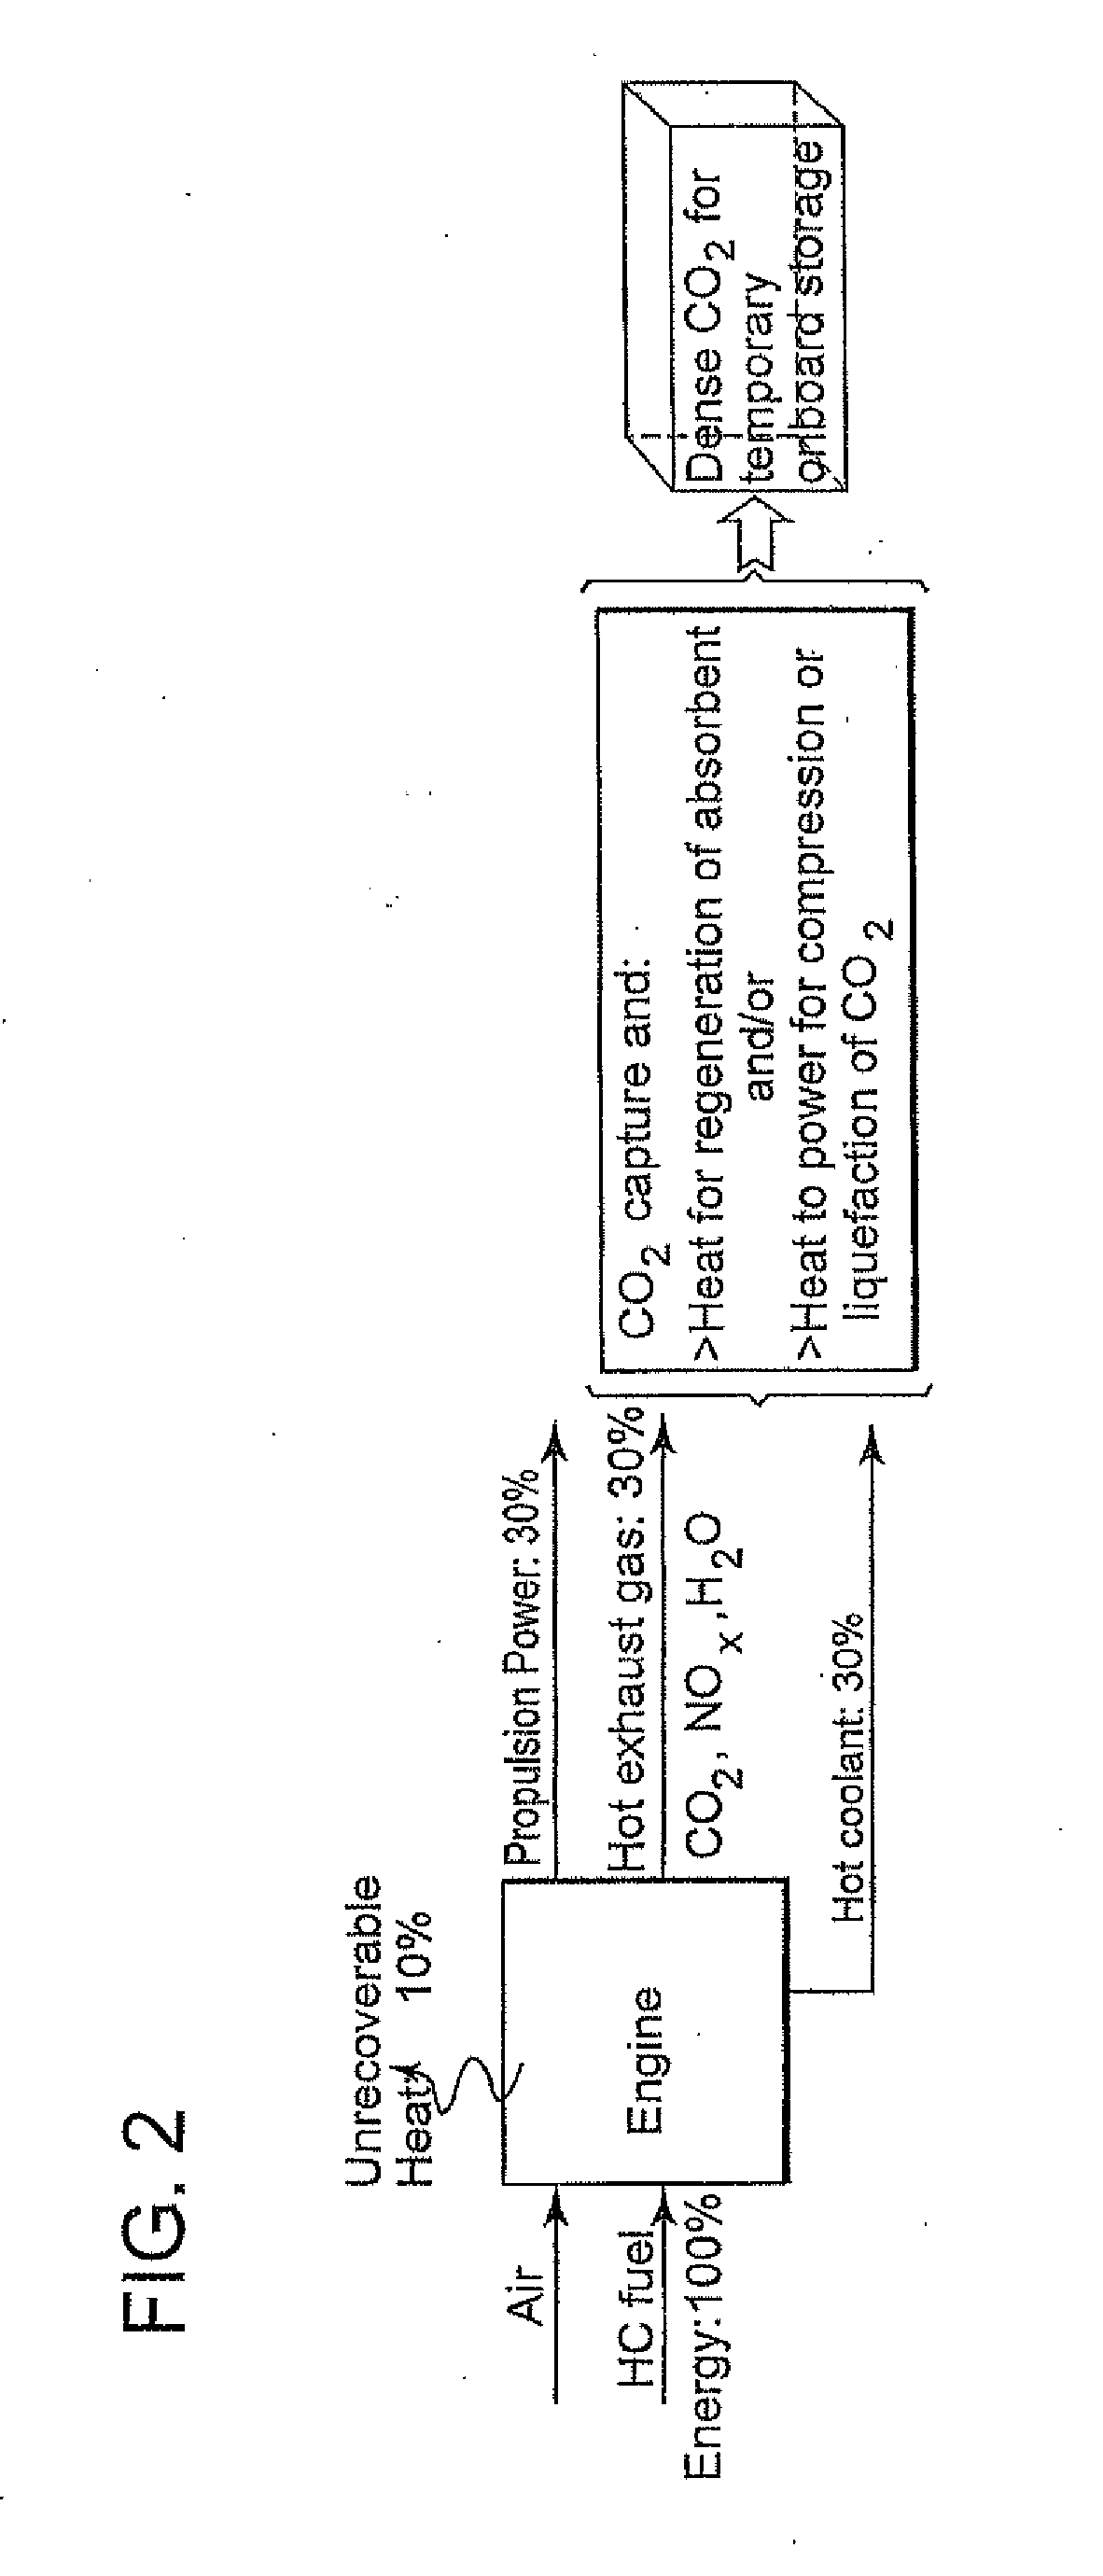 Reversible solid adsorption method and system utilizing waste heat for on-board recovery and storage of co2 from motor vehicle internal combustion engine exhaust gases